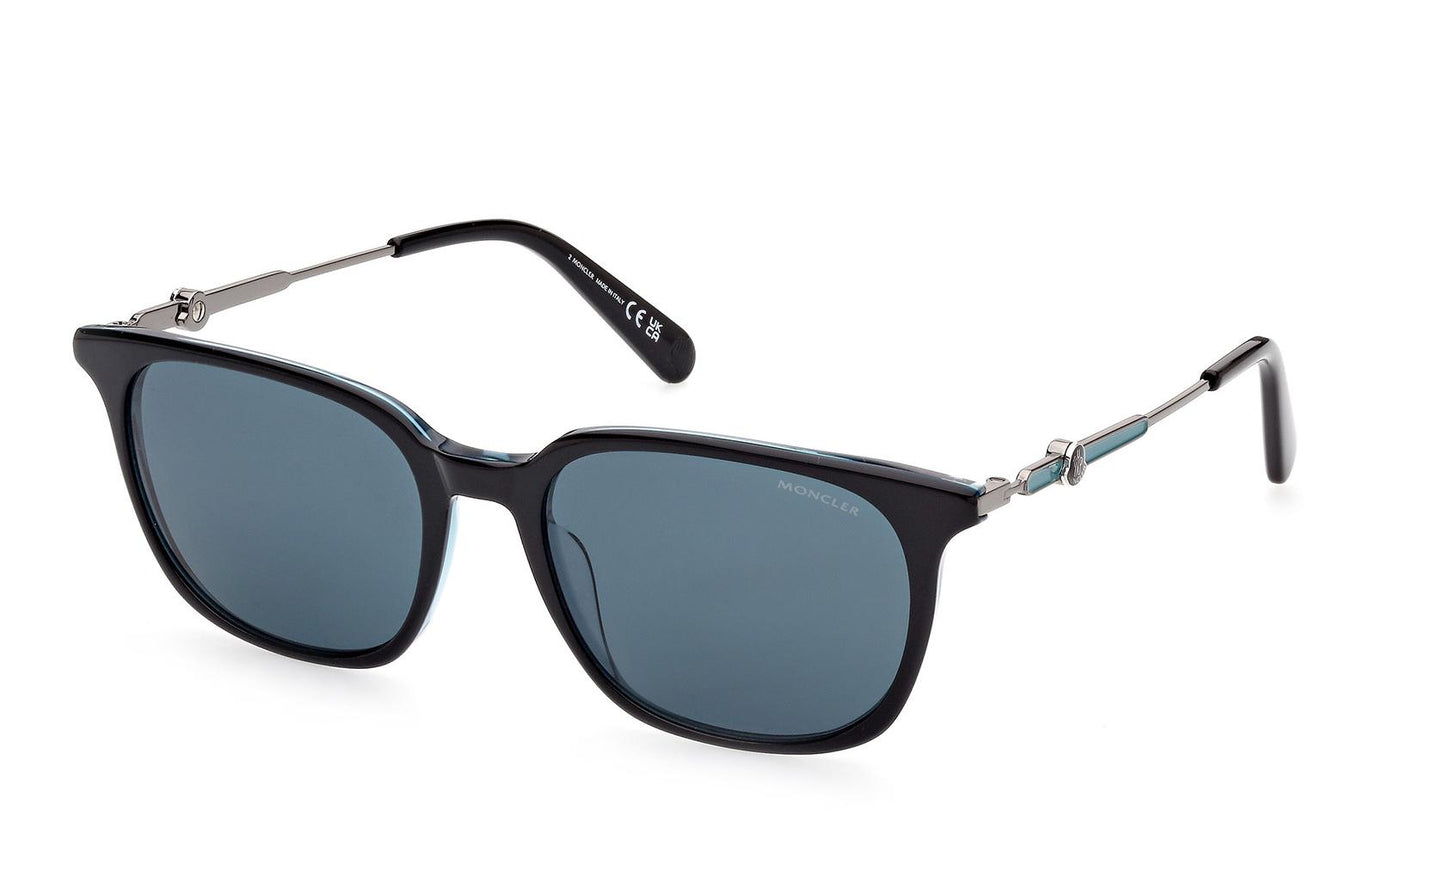 Load image into Gallery viewer, Moncler Sunglasses ML0225 05V
